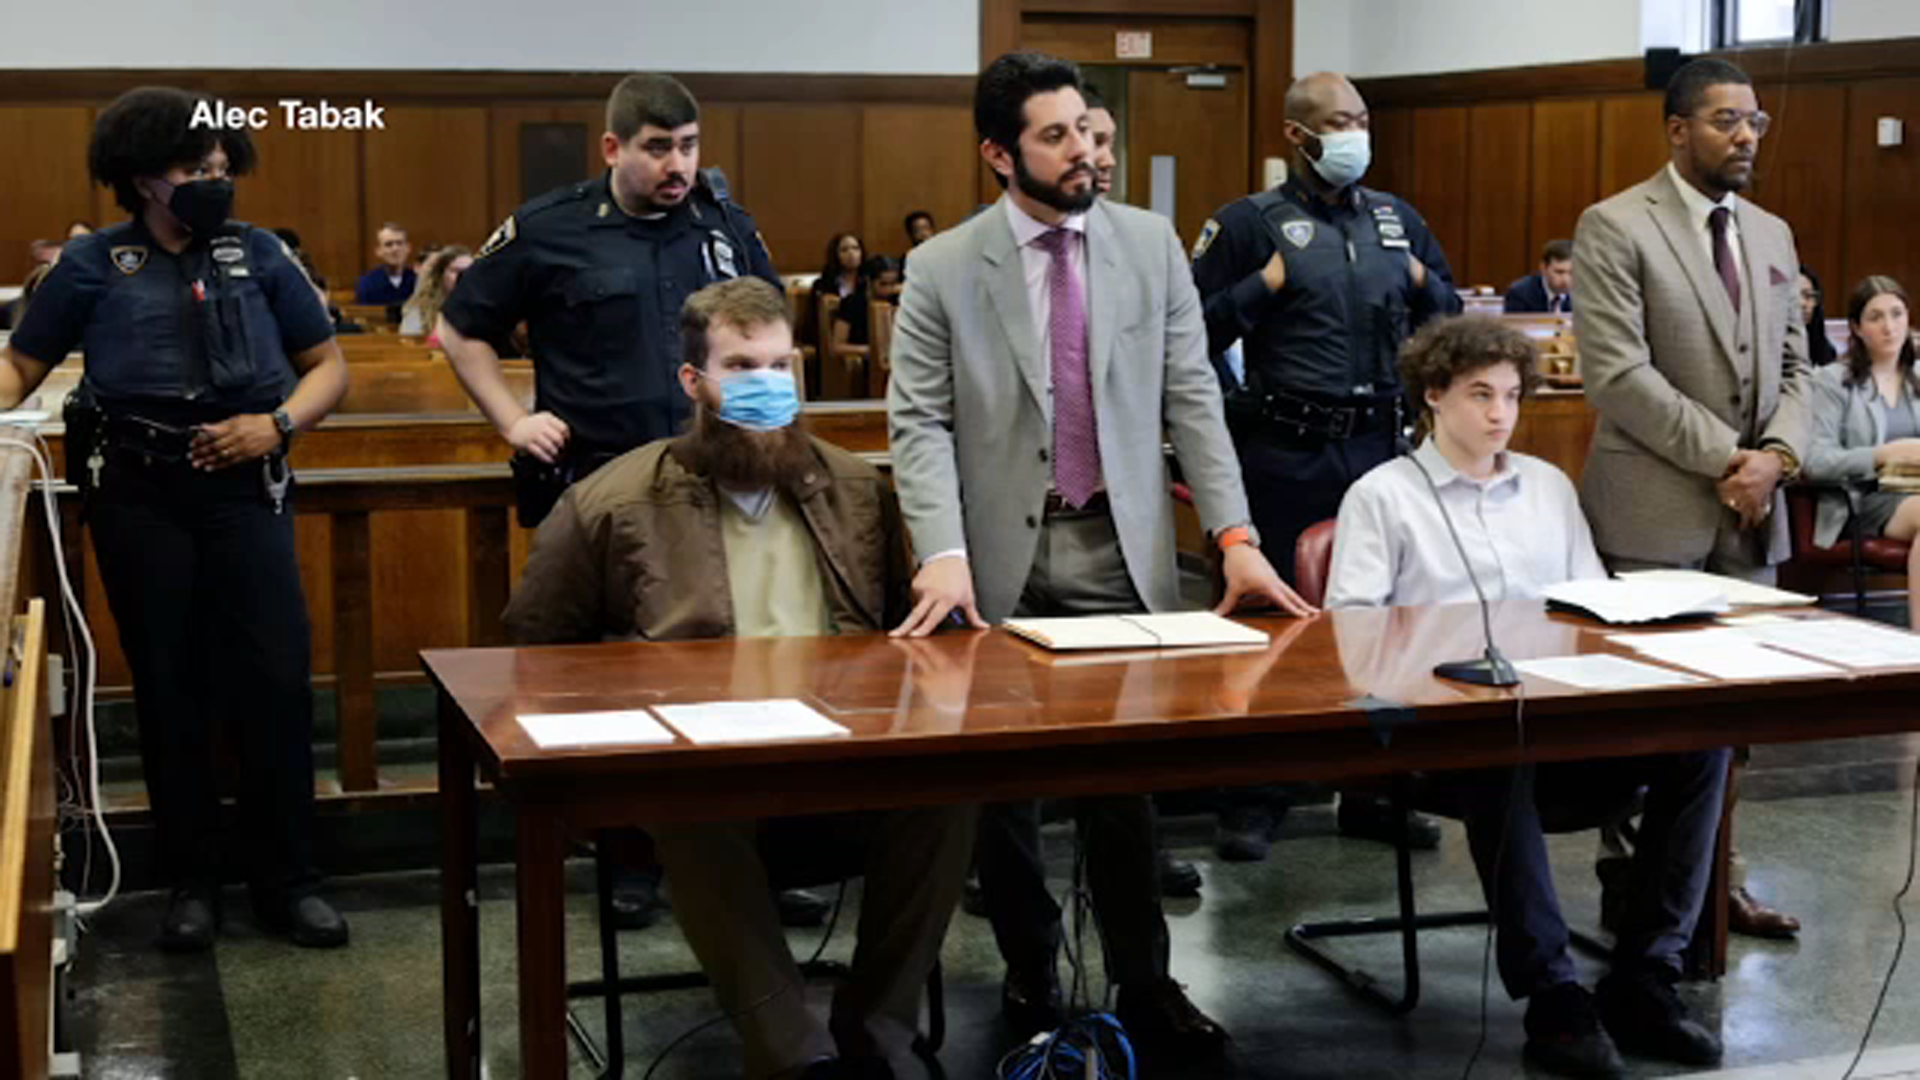 Defendants plead not guilty in alleged plot to attack Jewish community in New York City